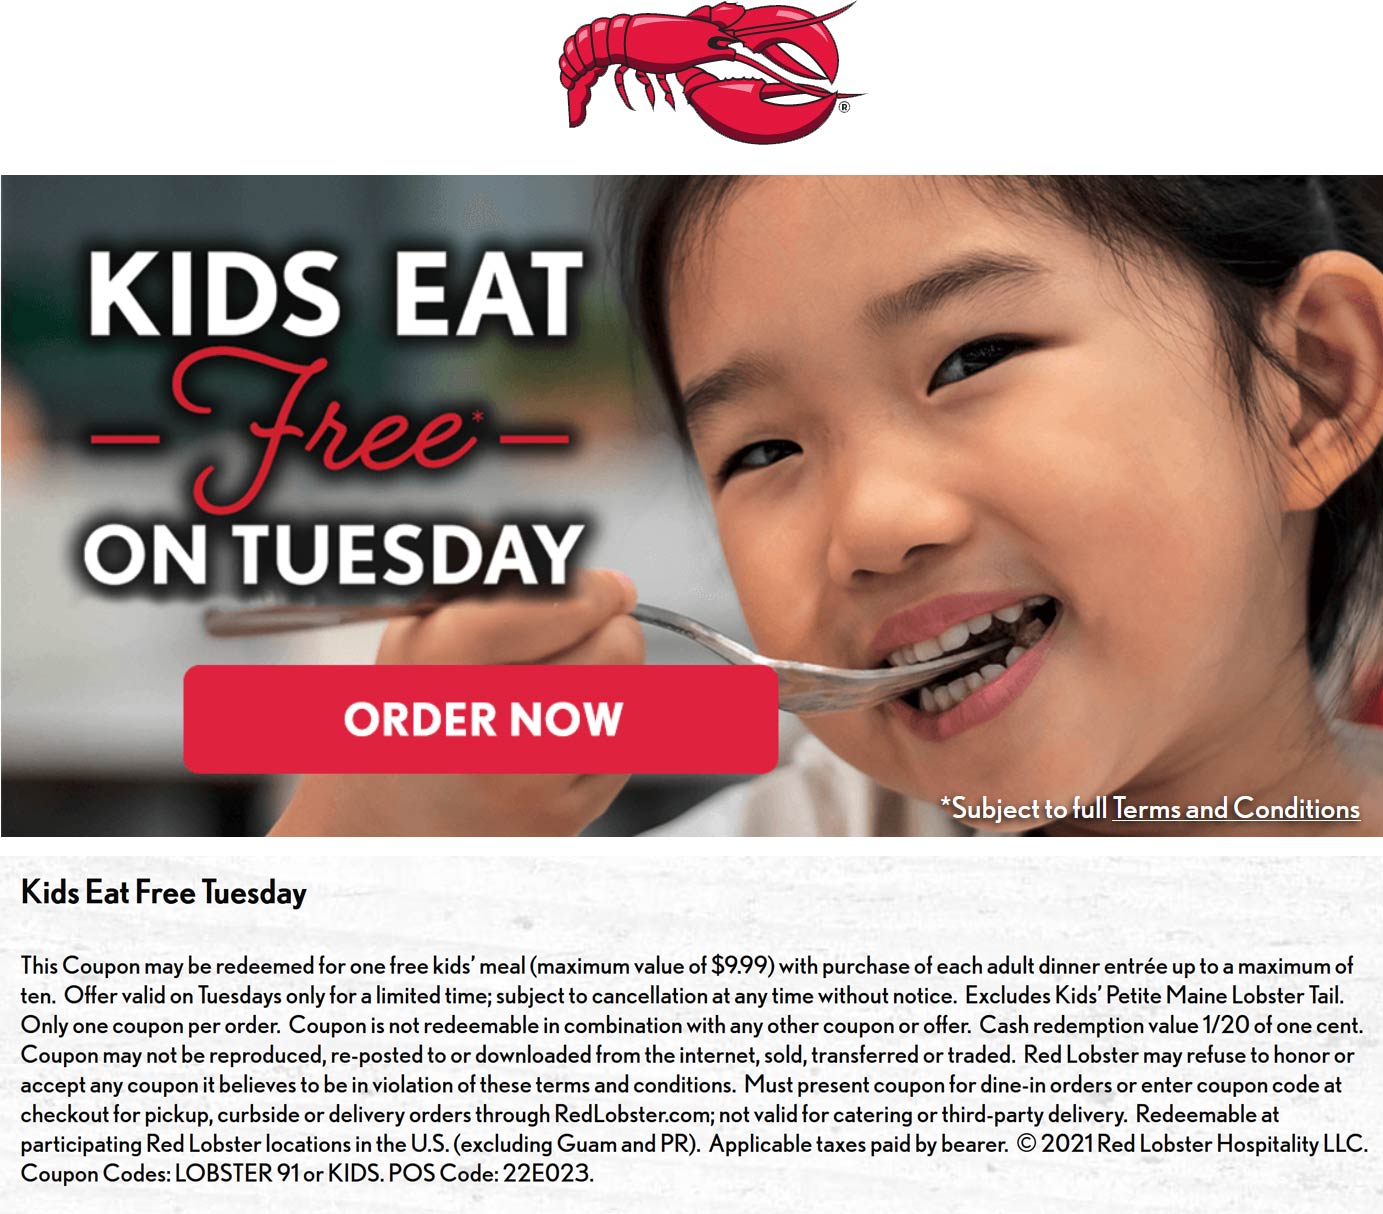 Red Lobster restaurants Coupon  Kids eat free with your entree today at Red Lobster, or to-go via promo code LOBSTER91 #redlobster 